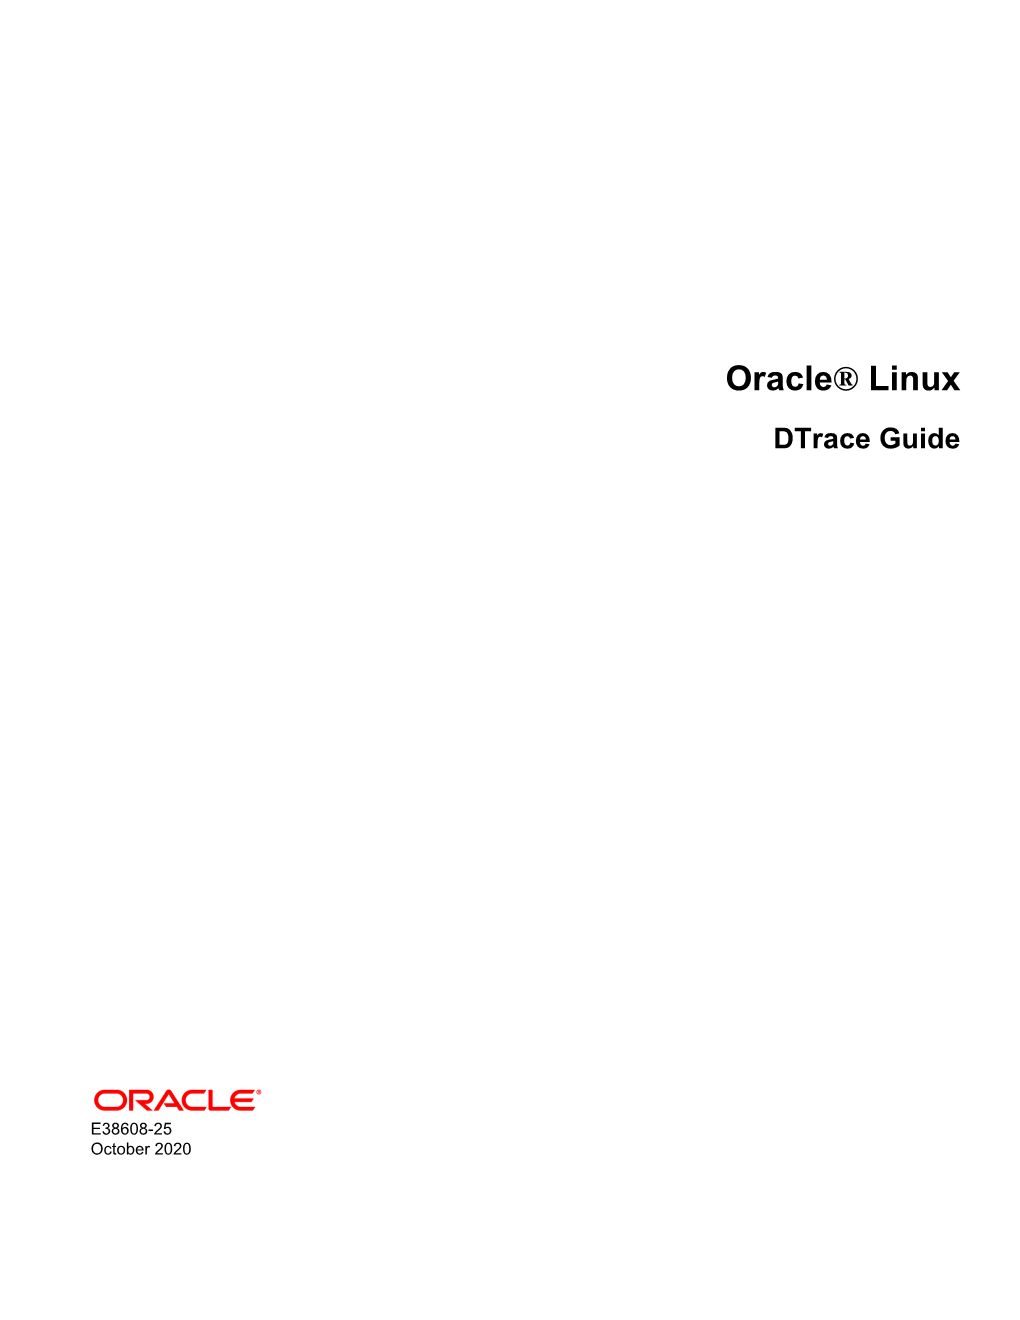 Oracle® Linux Dtrace Guide